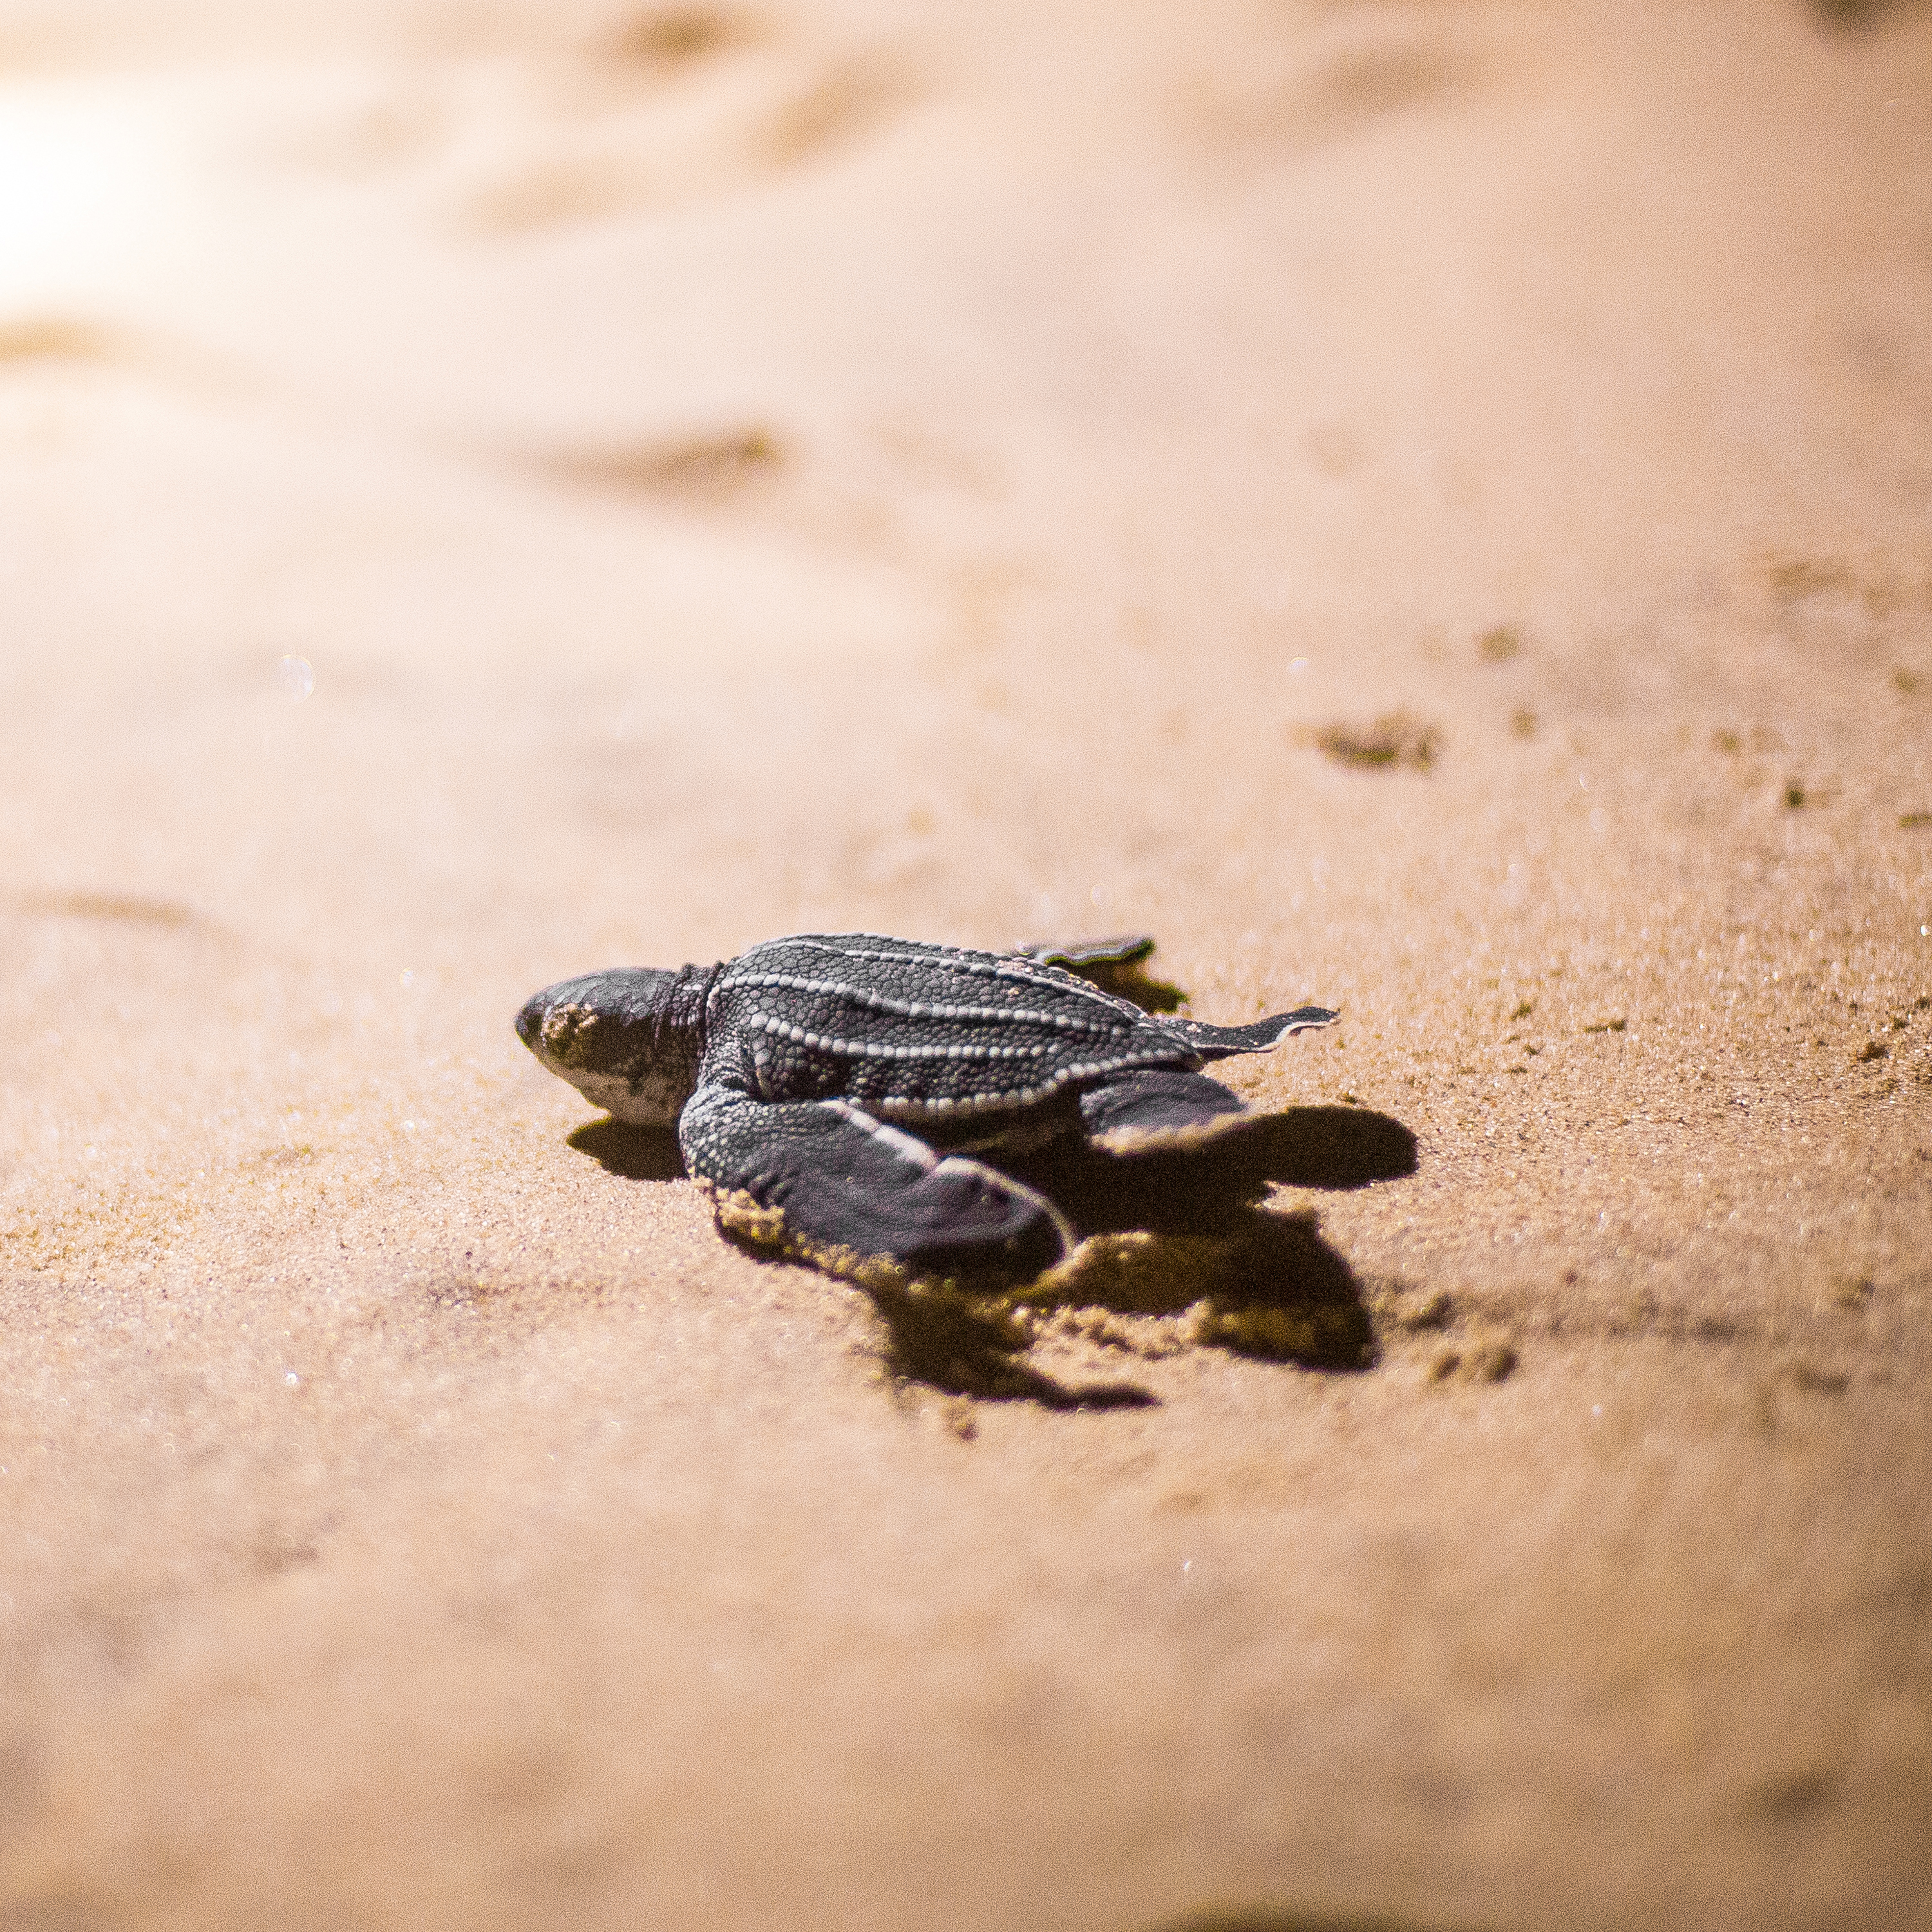 From 2017 to 2019, Earthwatch teams in Costa Rica helped more than 26,000 turtle hatchlings reach the ocean, ensuring their contribution to the recovery of endangered sea turtle populations in the East Pacific Ocean.